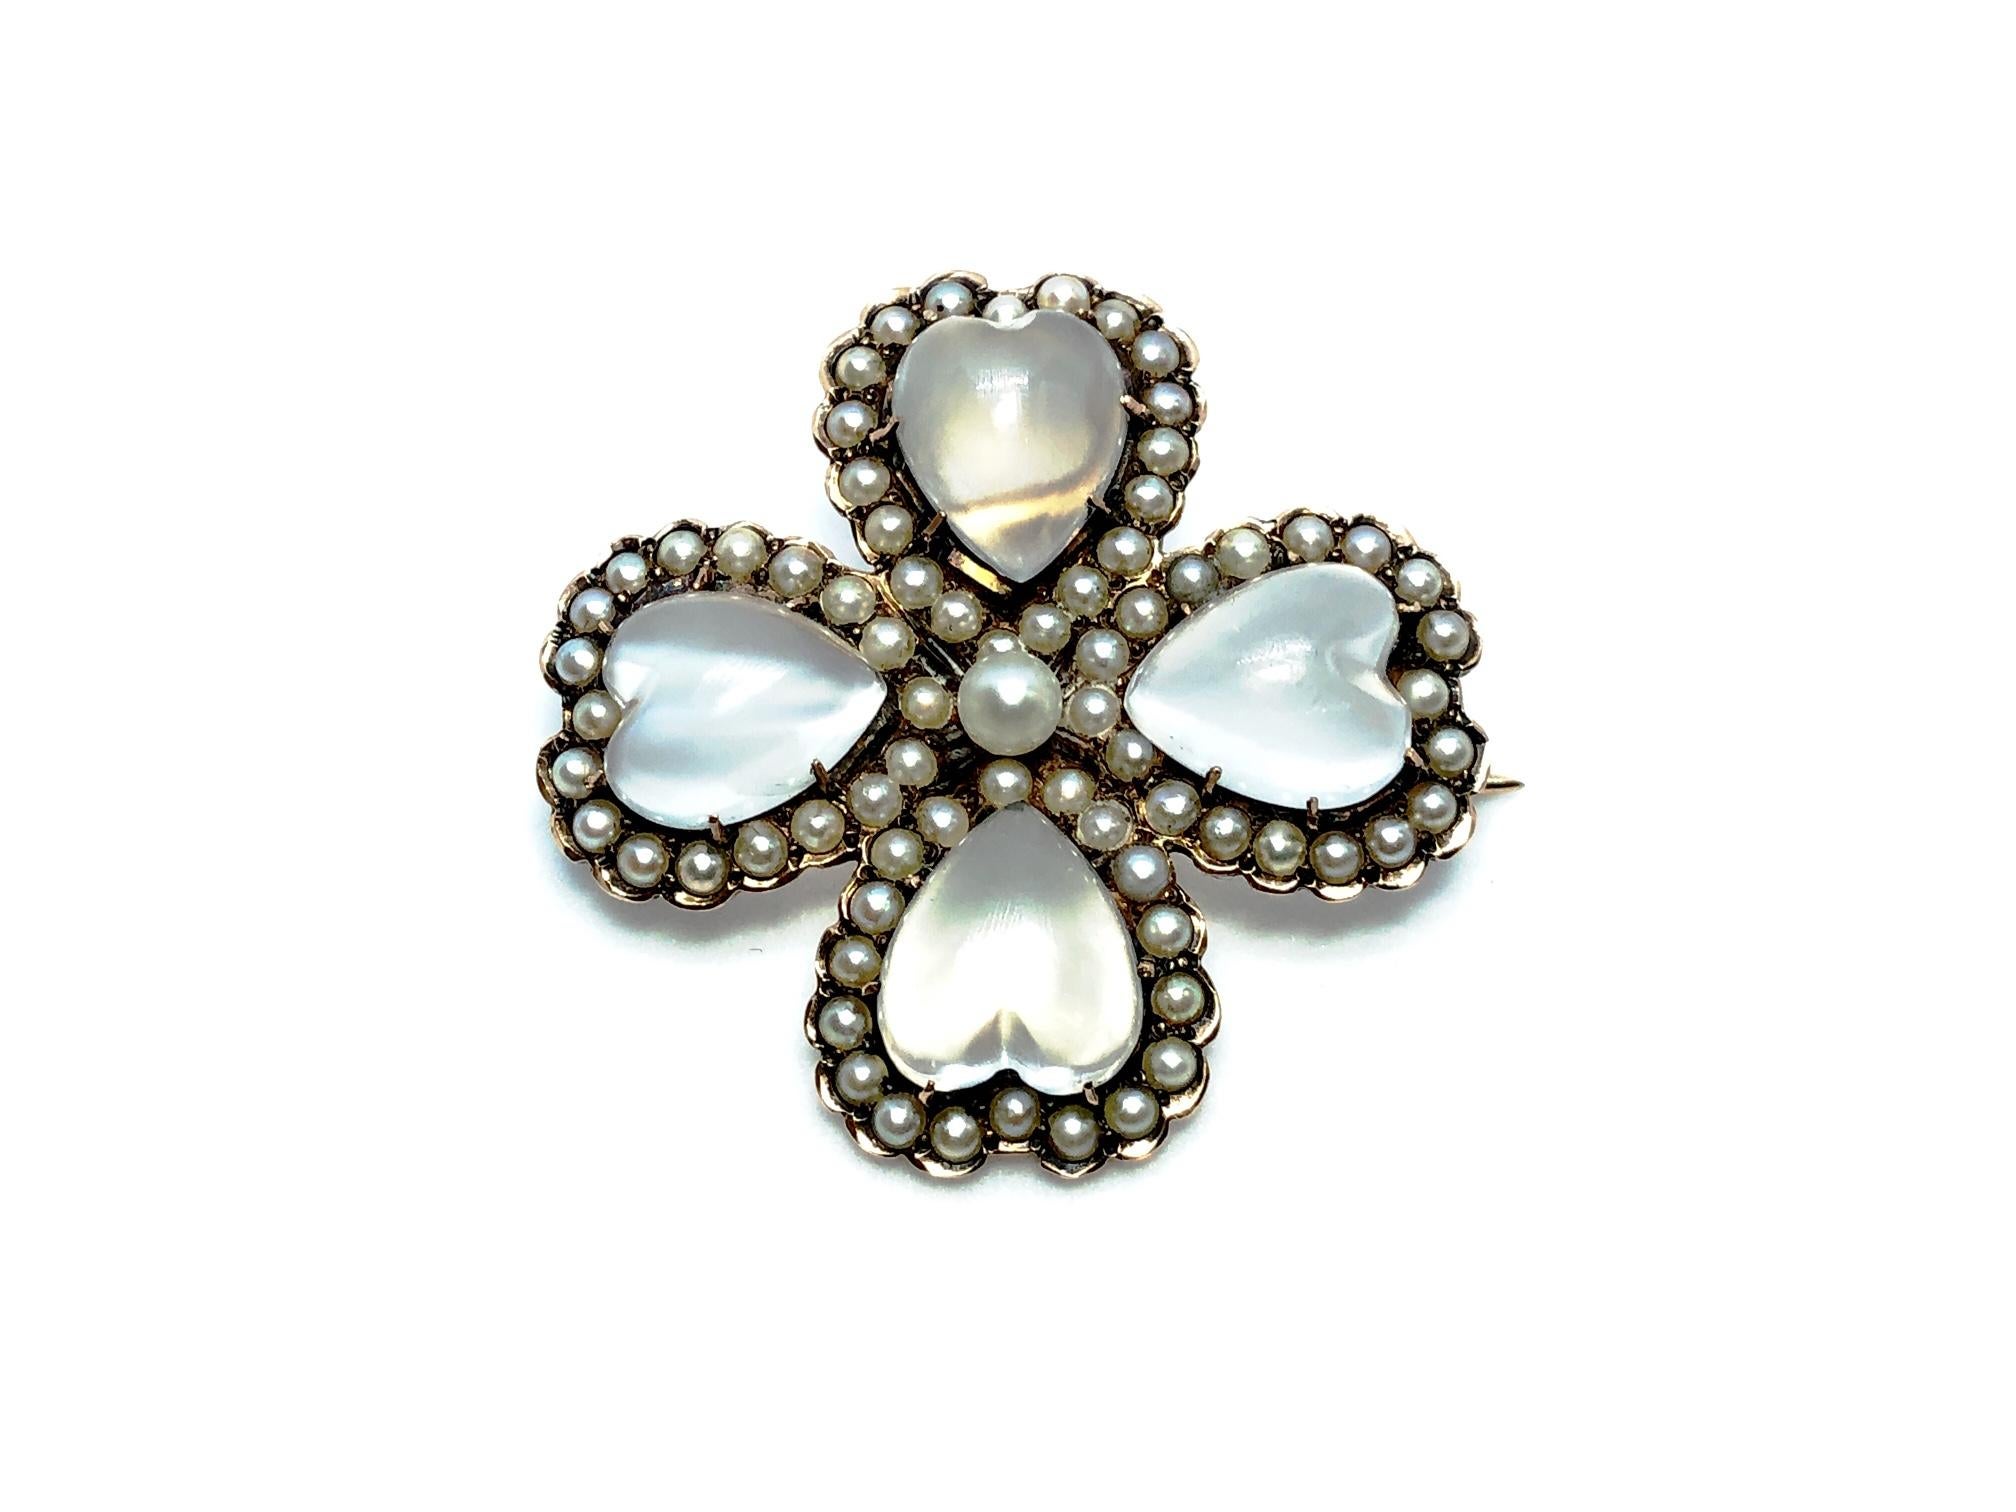 An antique moonstone and pearl four leaf clover brooch-cum-pendant, with four heart shape moonstones, surrounded by natural half seed pearls, with a natural pearl in the centre, mounted in 14ct gold. engraved Mary Ellison June. 15 '90.